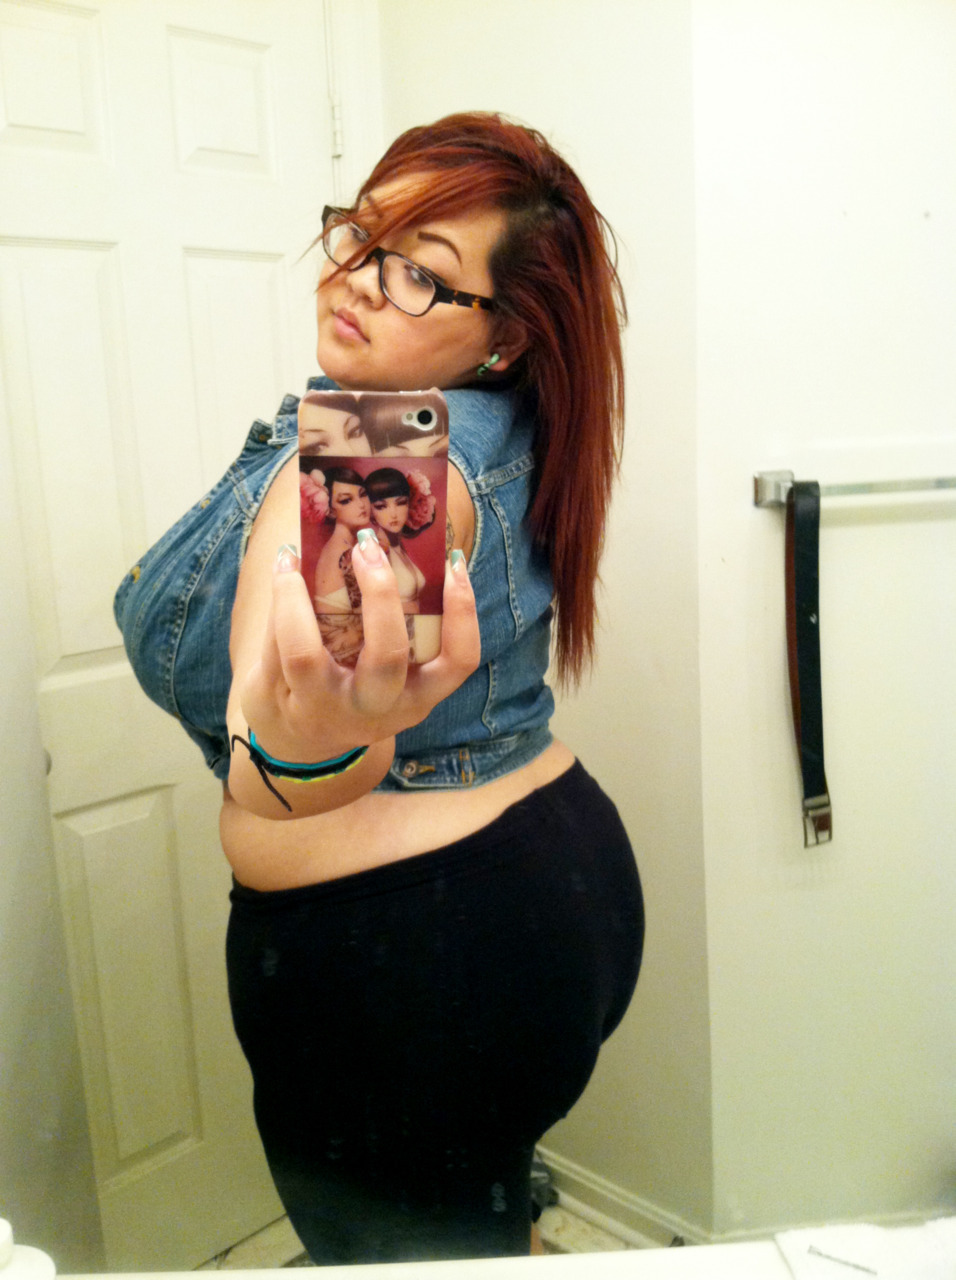 Thisisroy – Ohreinababyy – What A Ginger – Damn Gingers Wit Their Cute Asian Faces Impeccable Curves Mesmerizing Eyes An…5